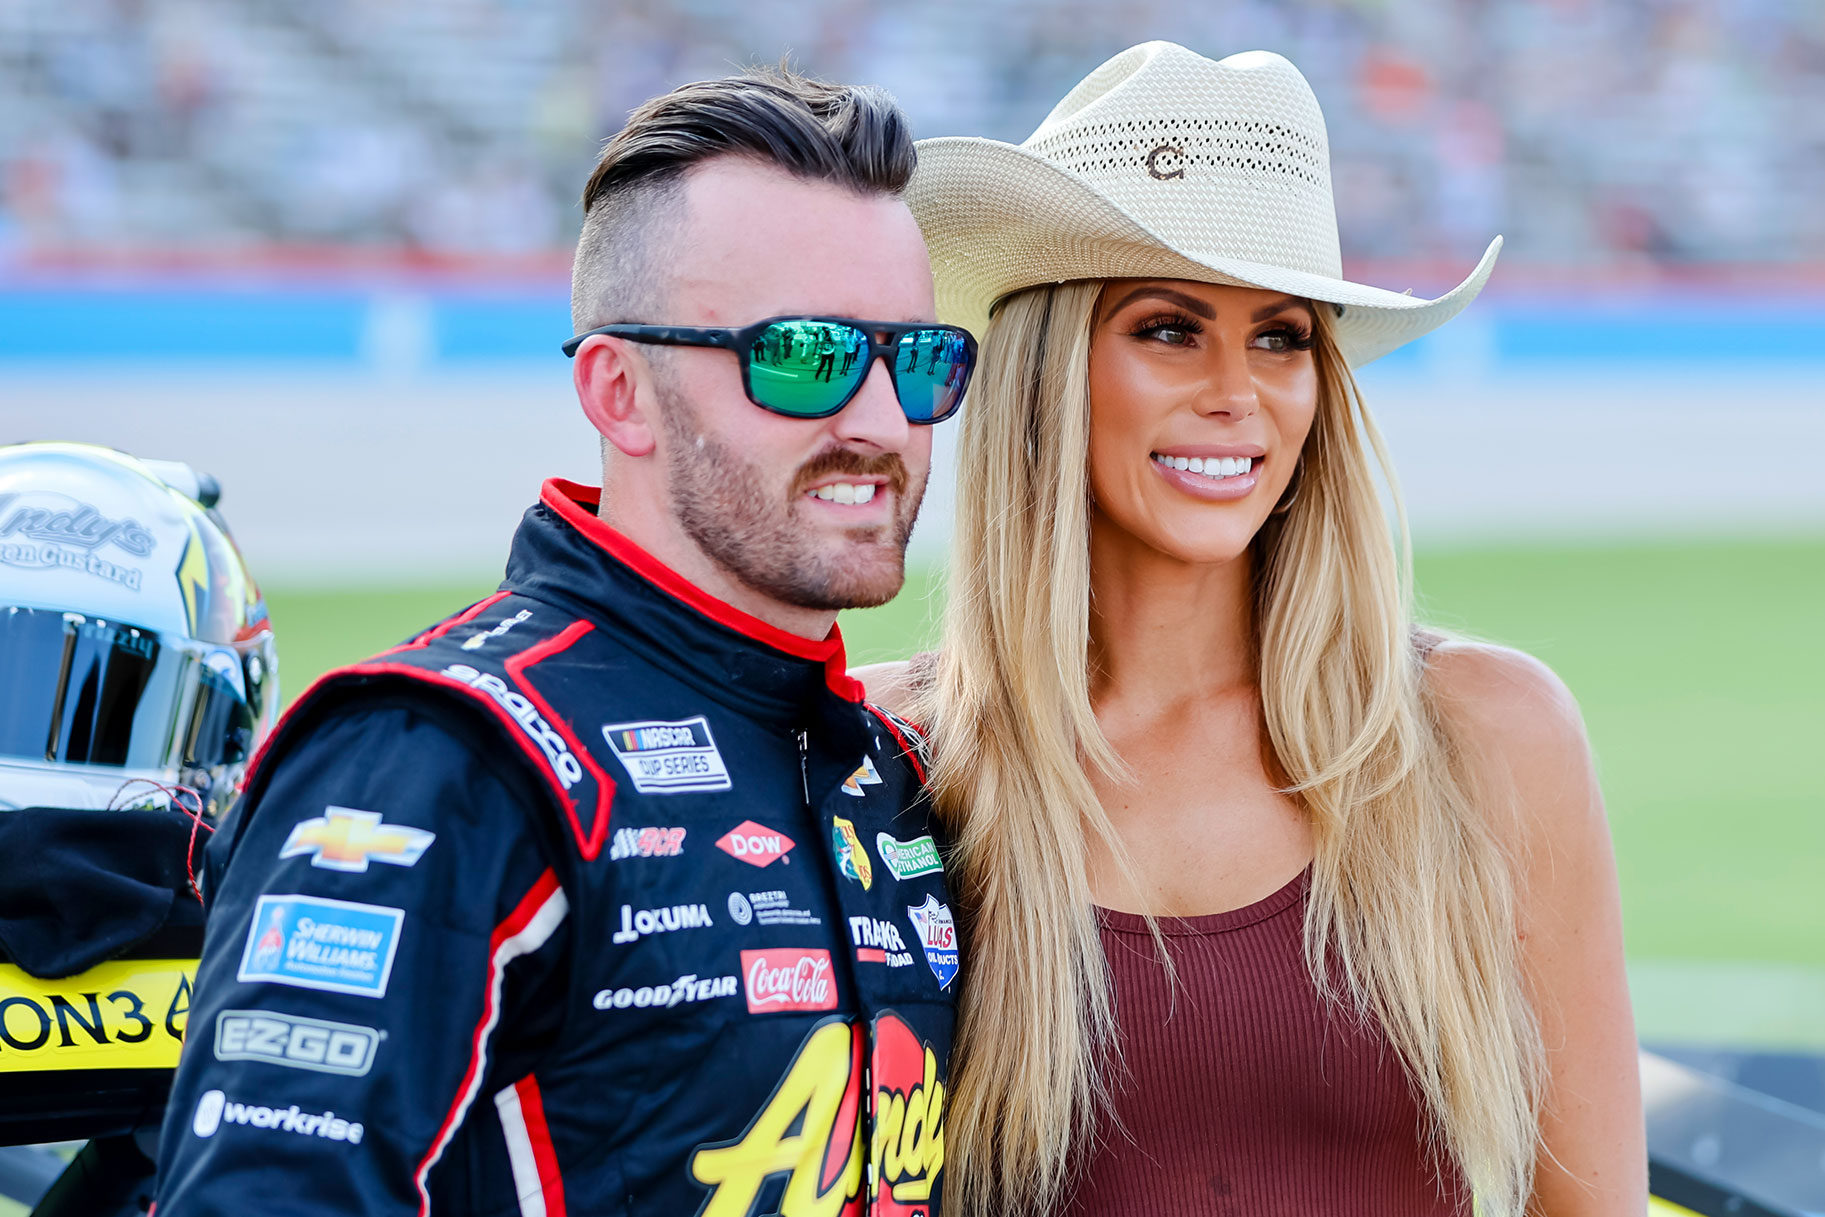 Life In The Fast Lane's Austin and Whitney Dillon posed together on the racetrack